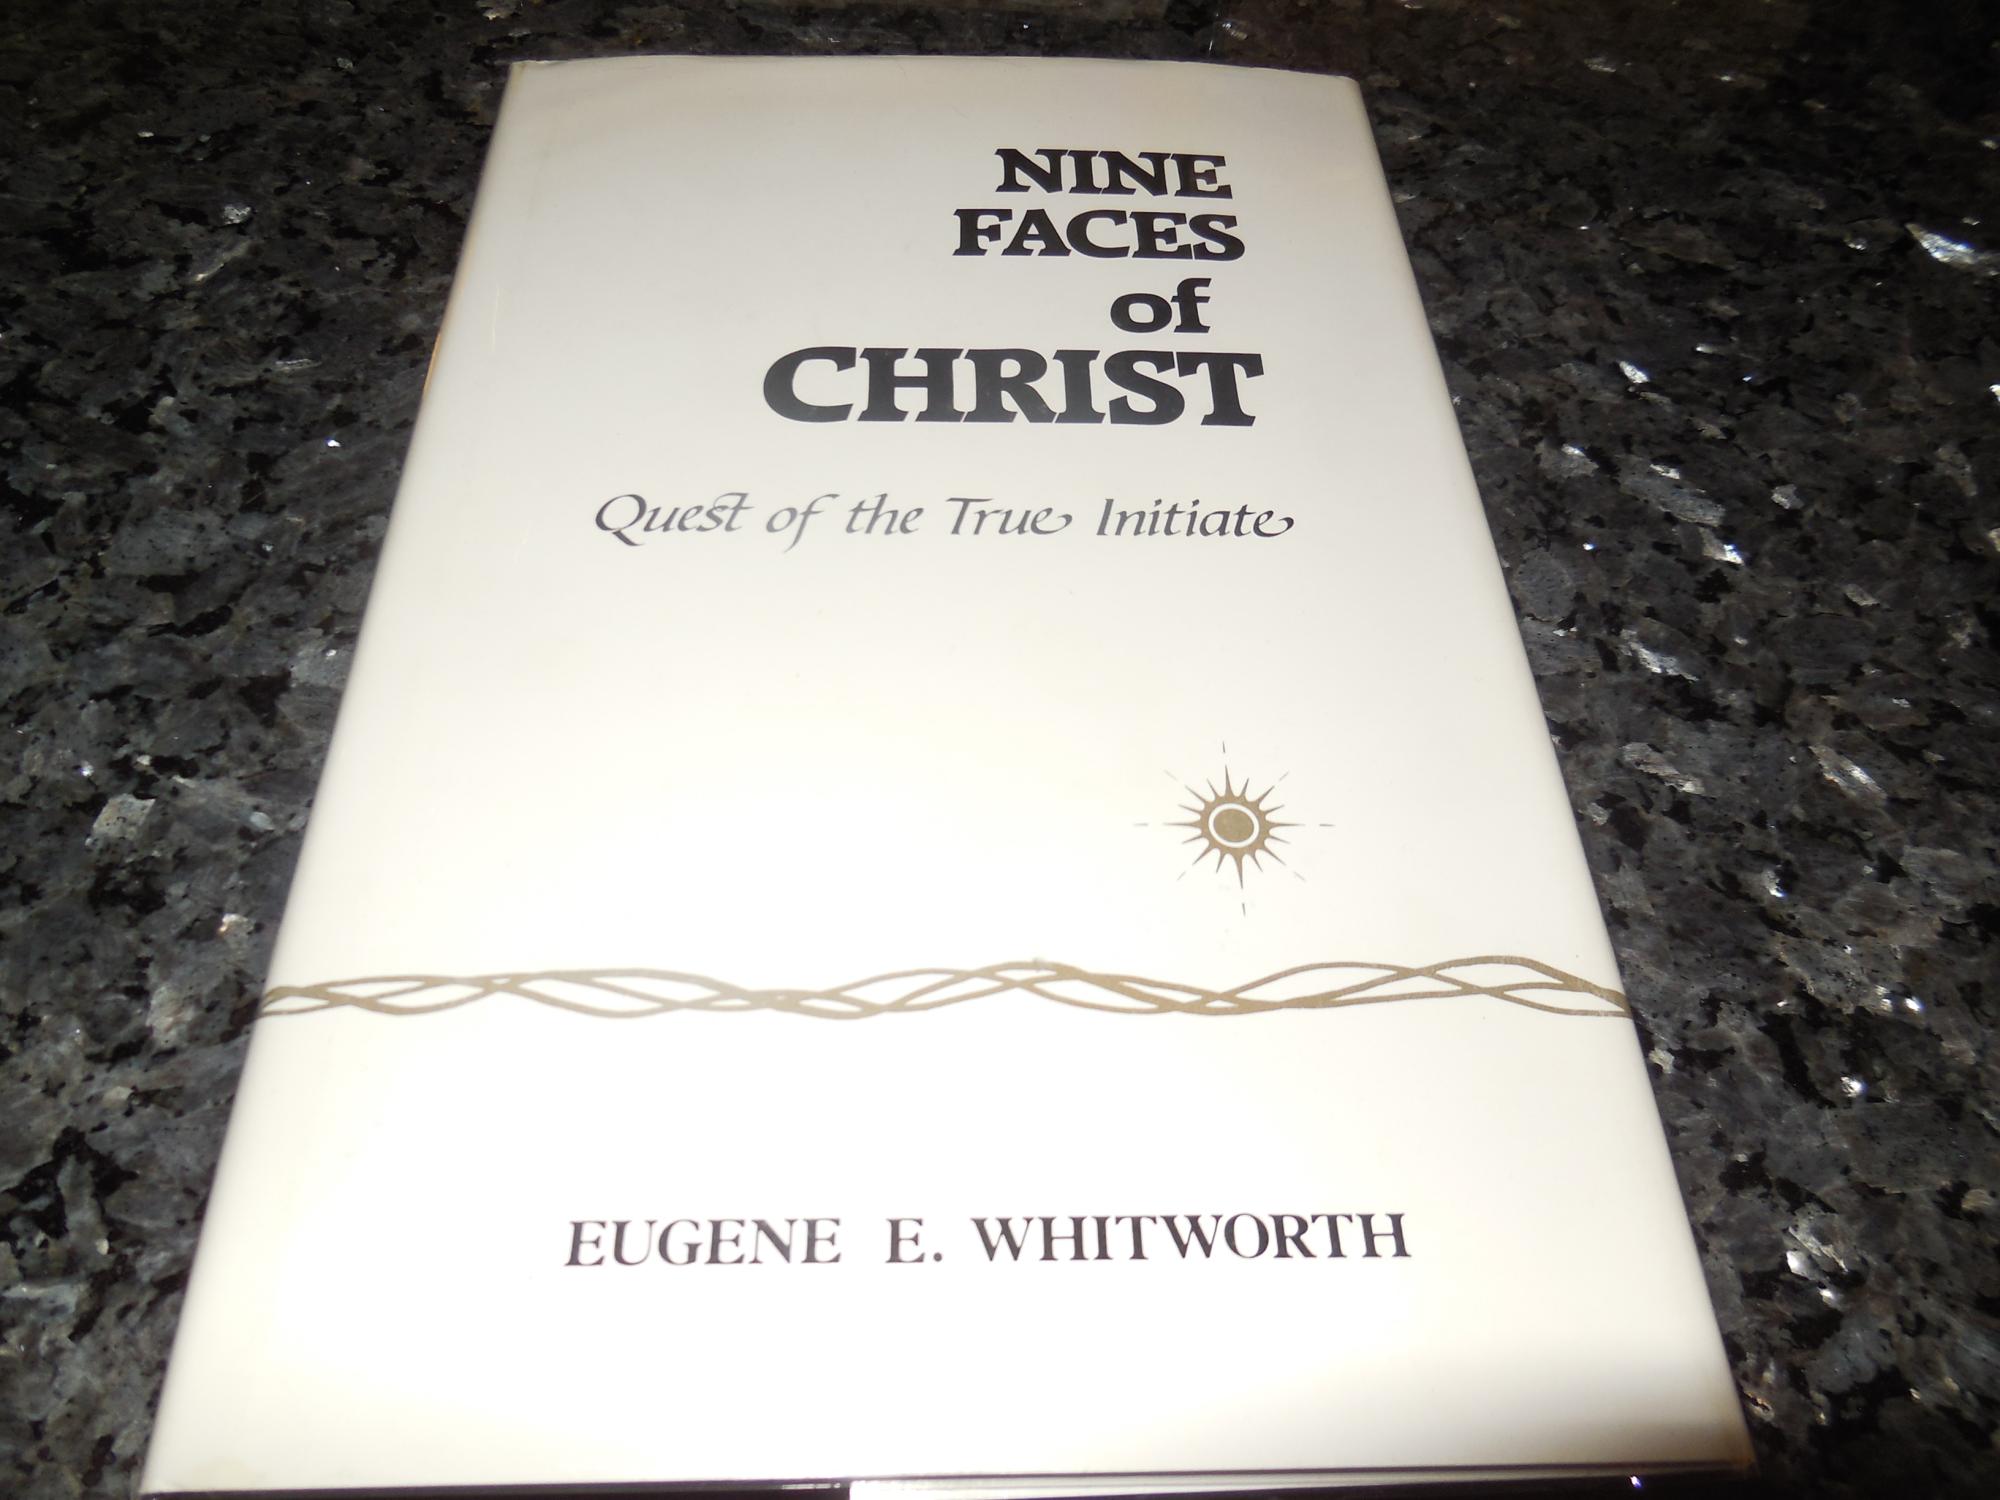 Nine Faces of Christ: A Narrative of Nine Great Mystic Initiations of Joseph-bar-Joseph in the Eternal Religion - Whitworth, Eugene E.